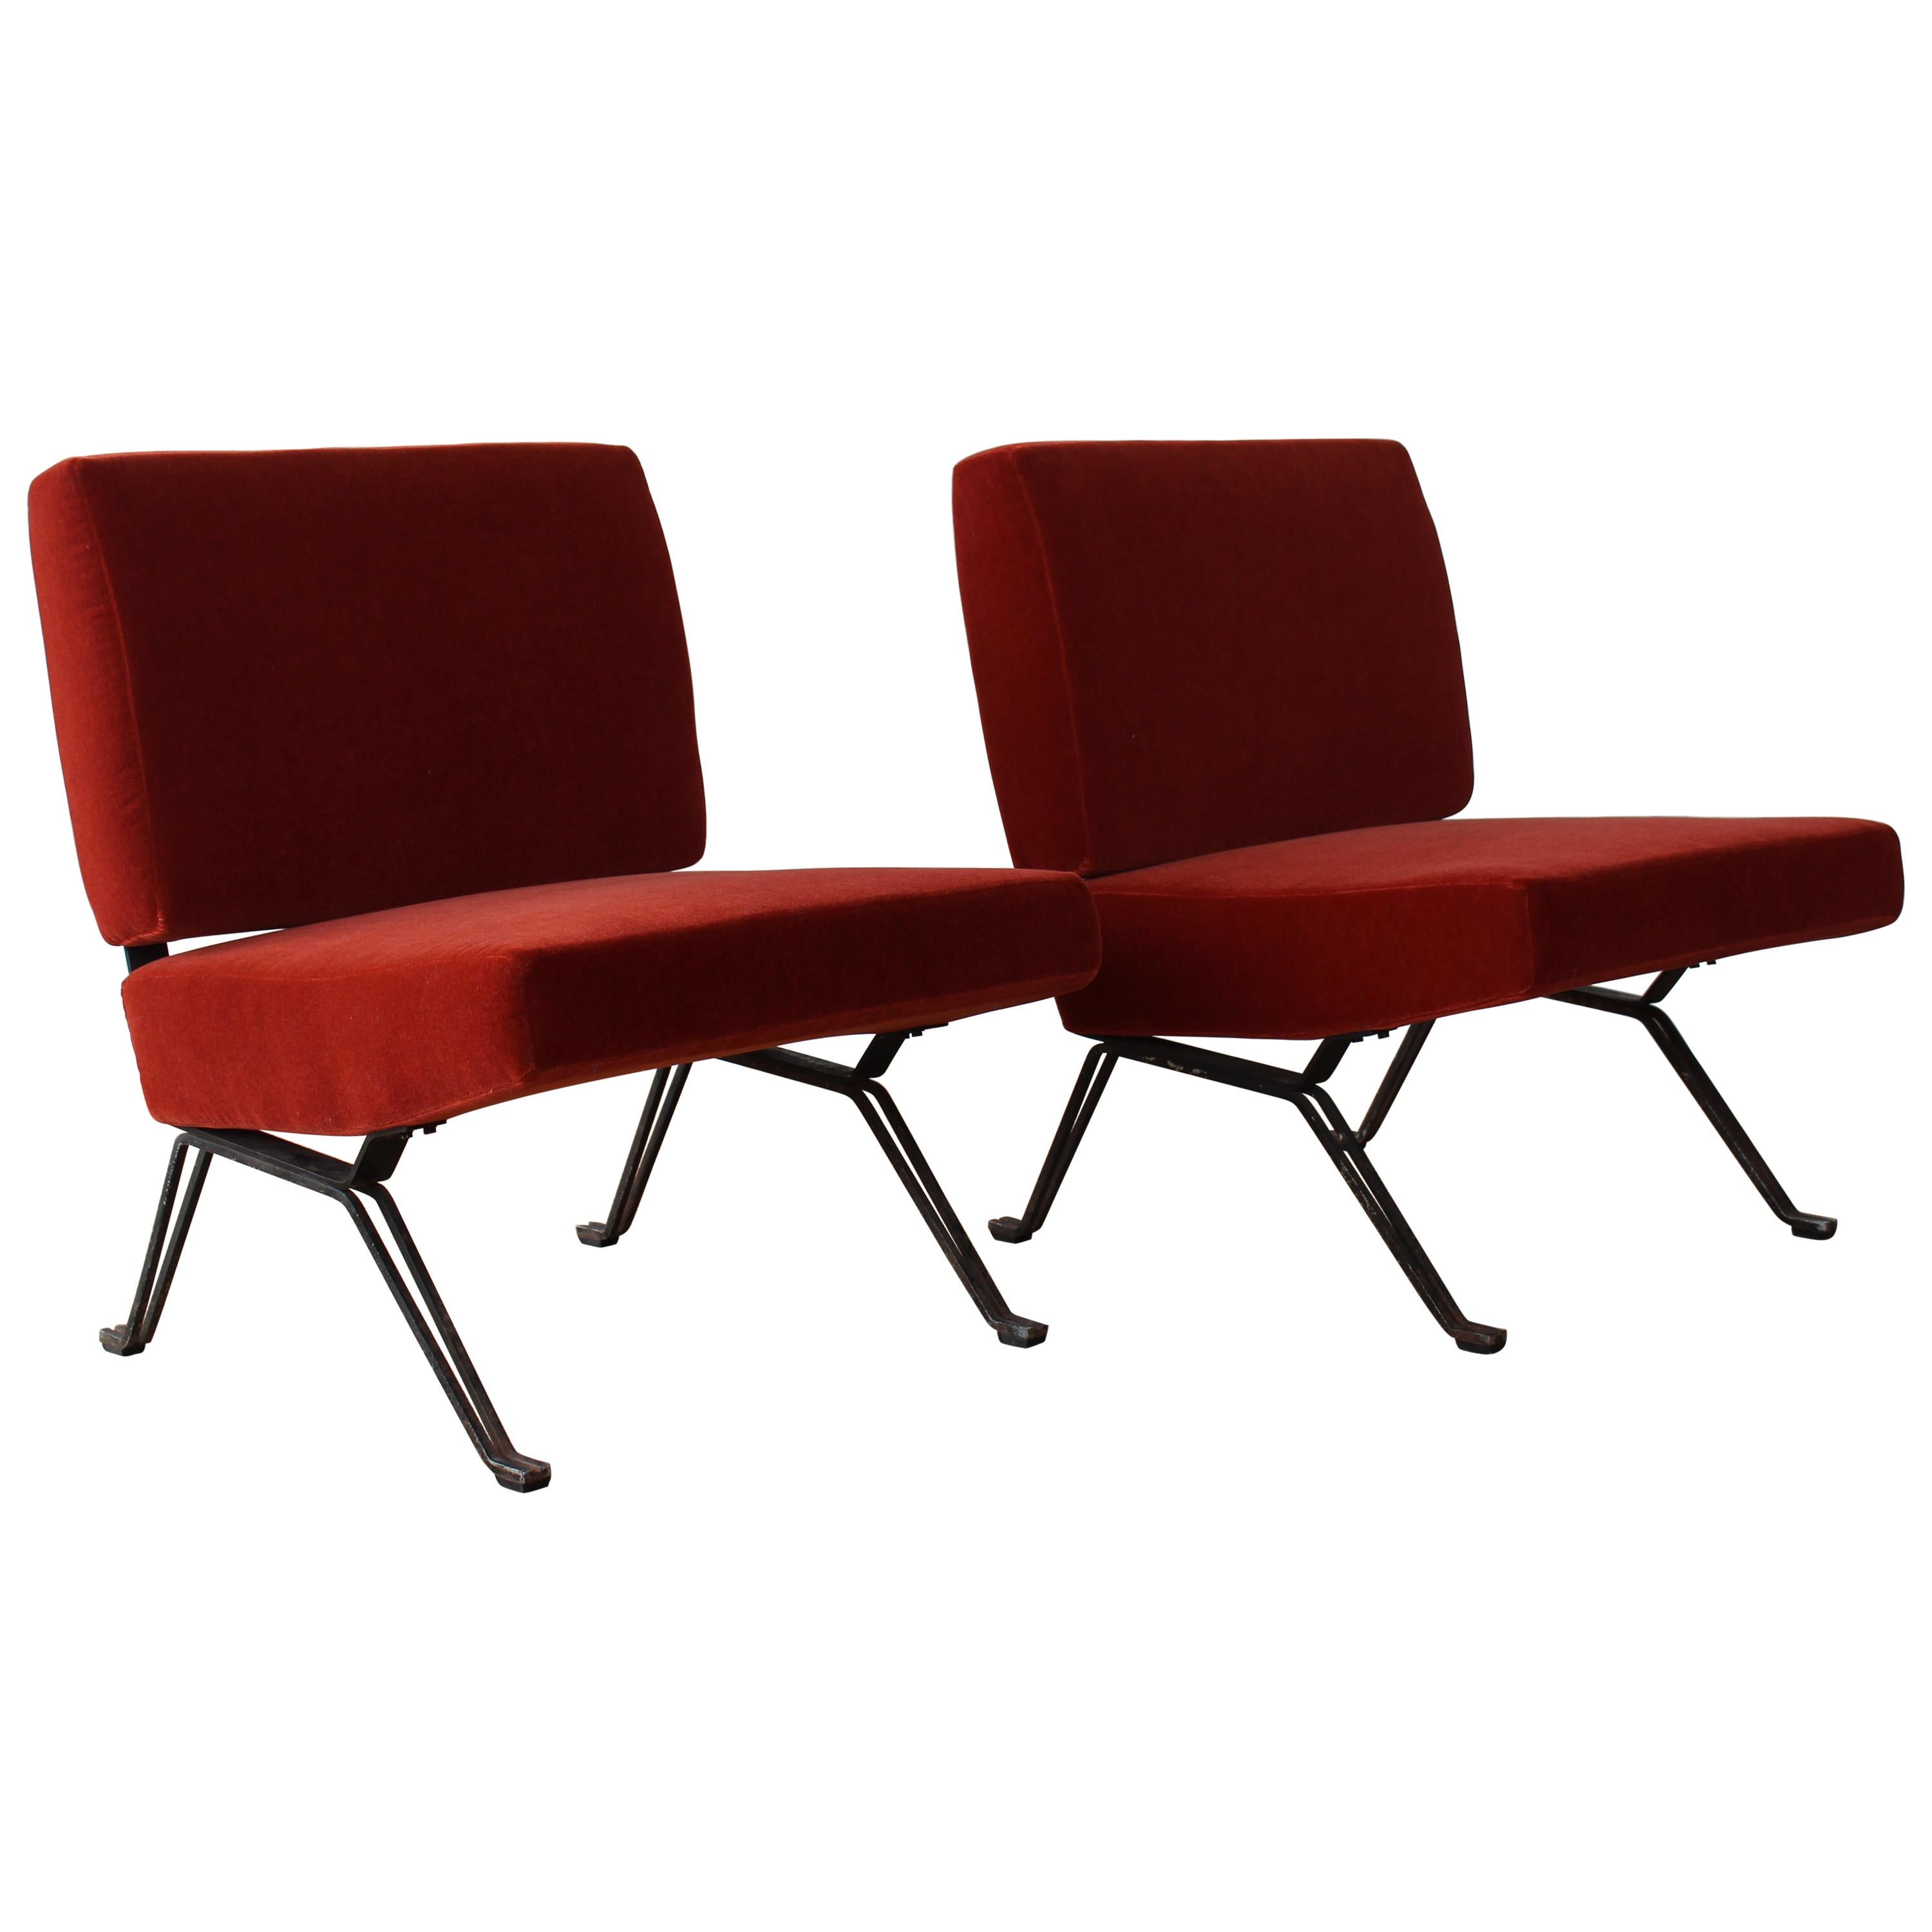 Pair of Lounge Chairs in Mohair on Iron Bases, Italy, 1950s